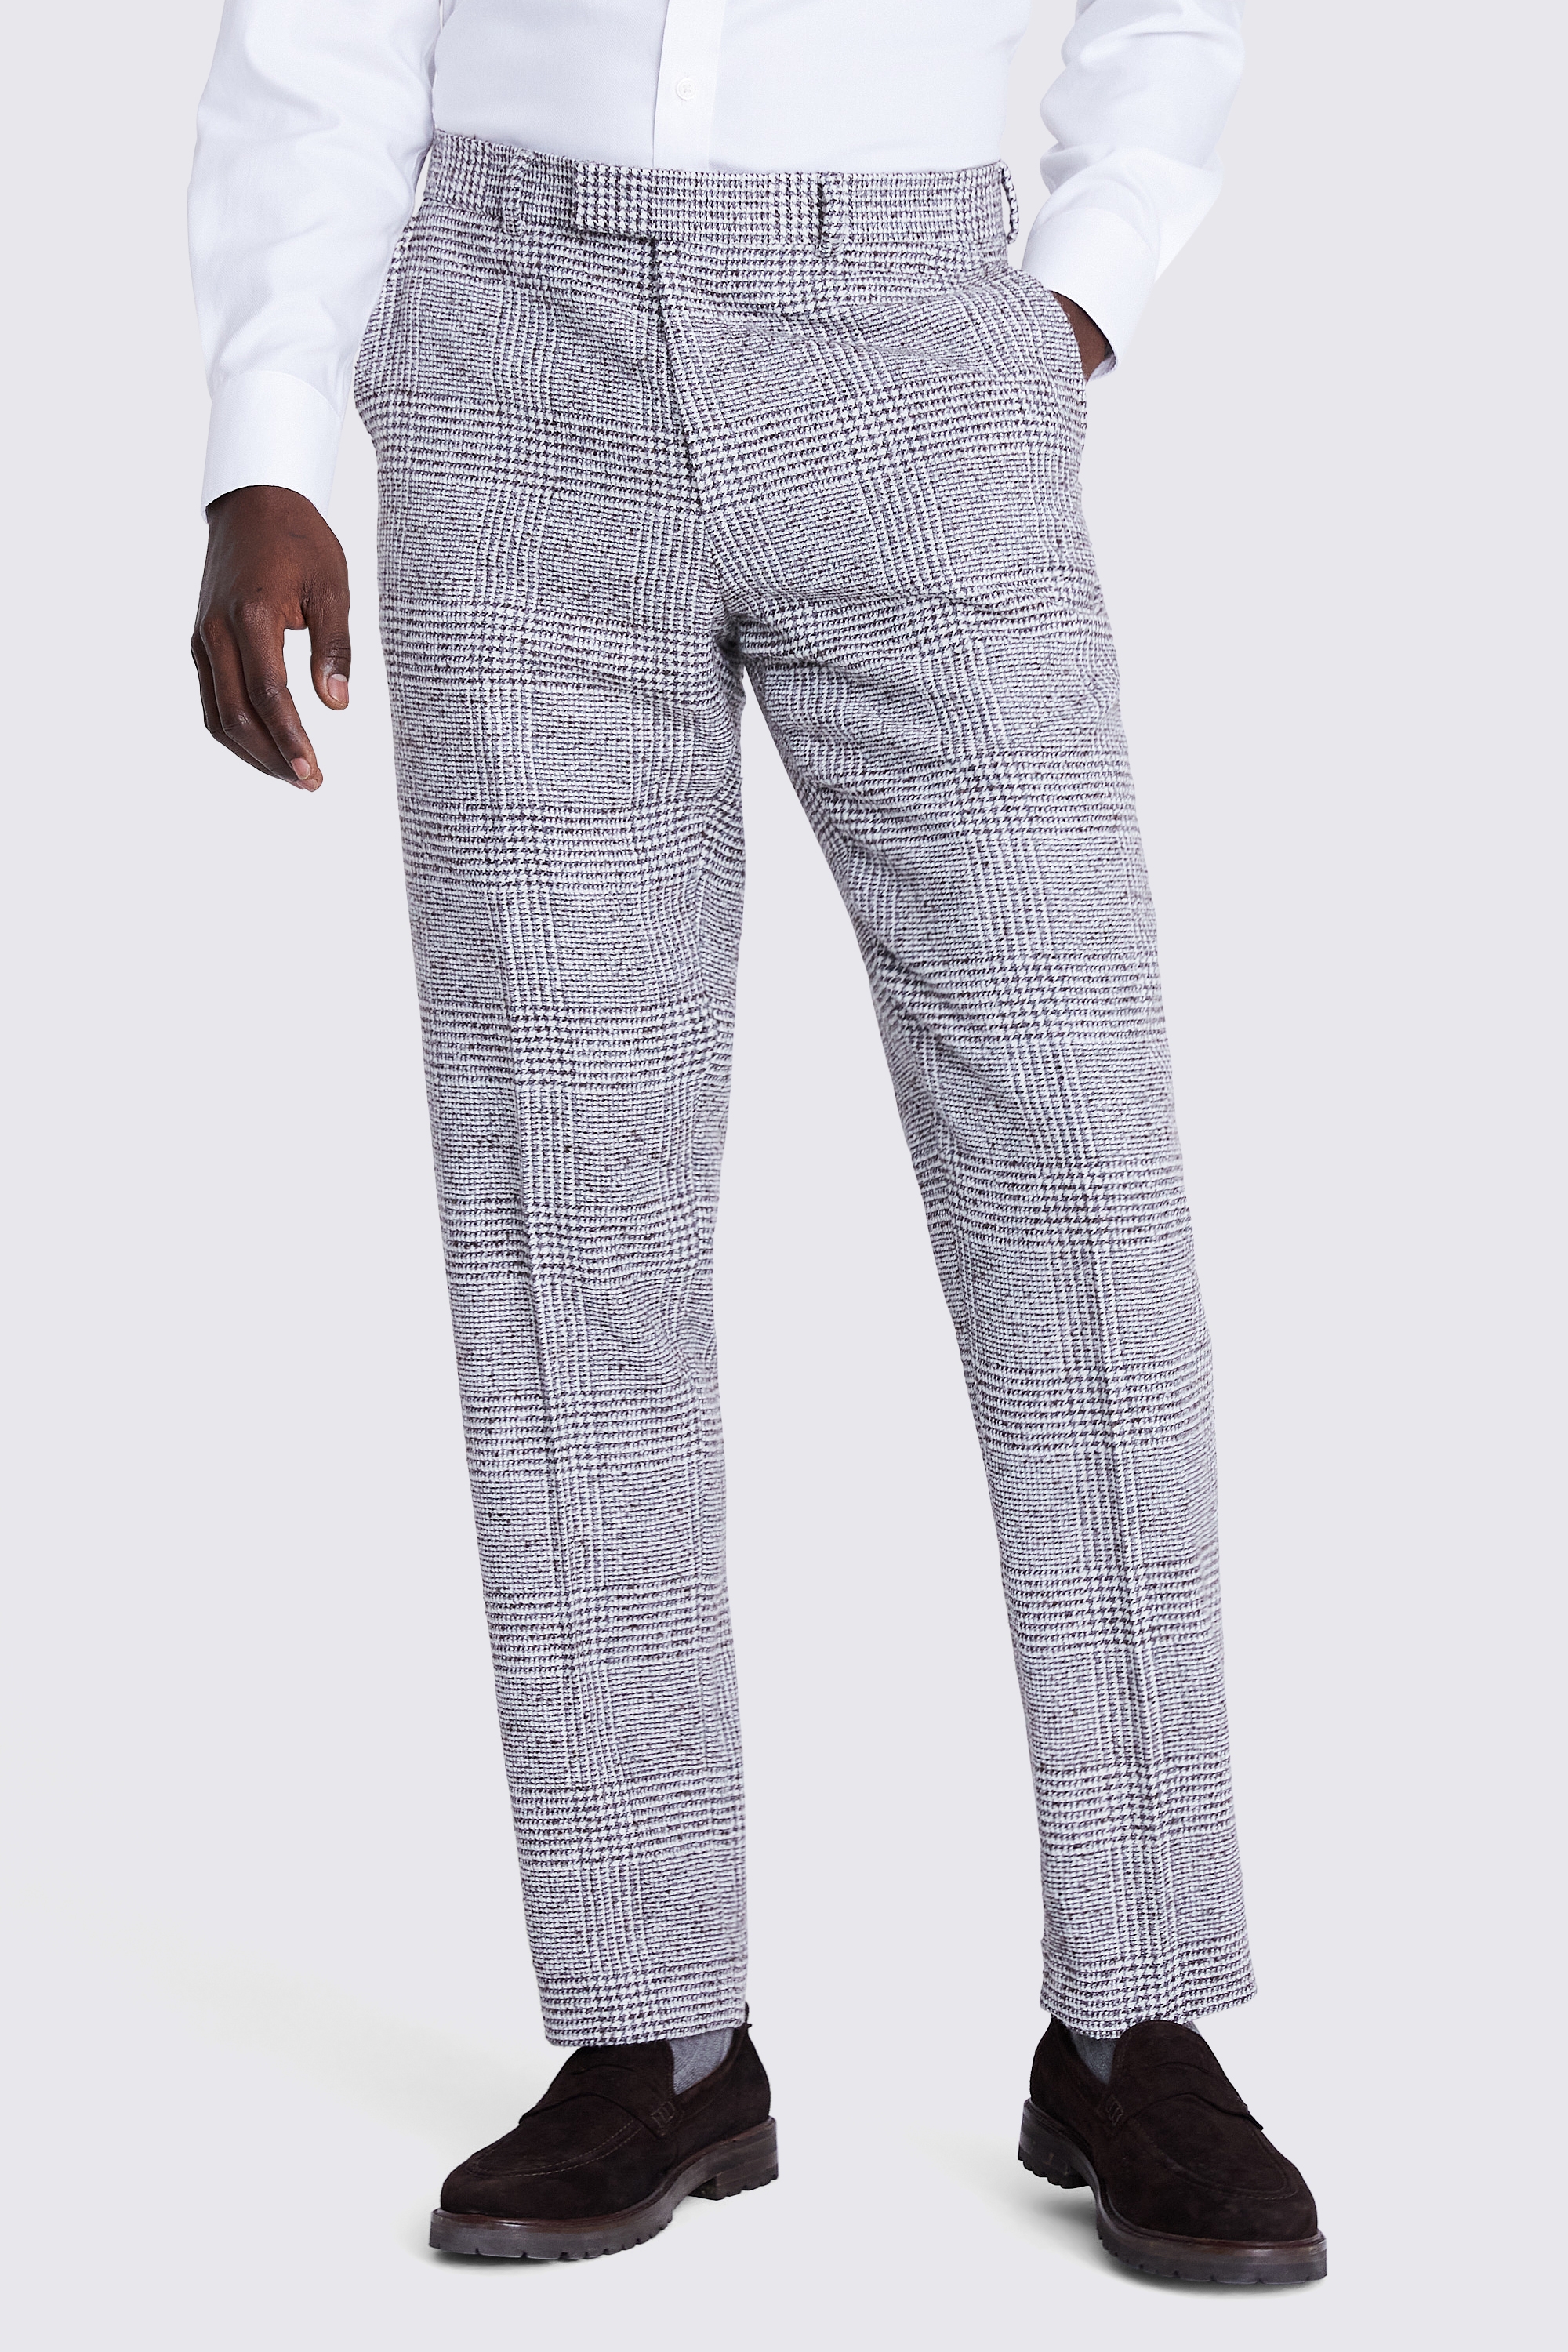 Tailored Fit Grey Check Tweed Jacket | Buy Online at Moss